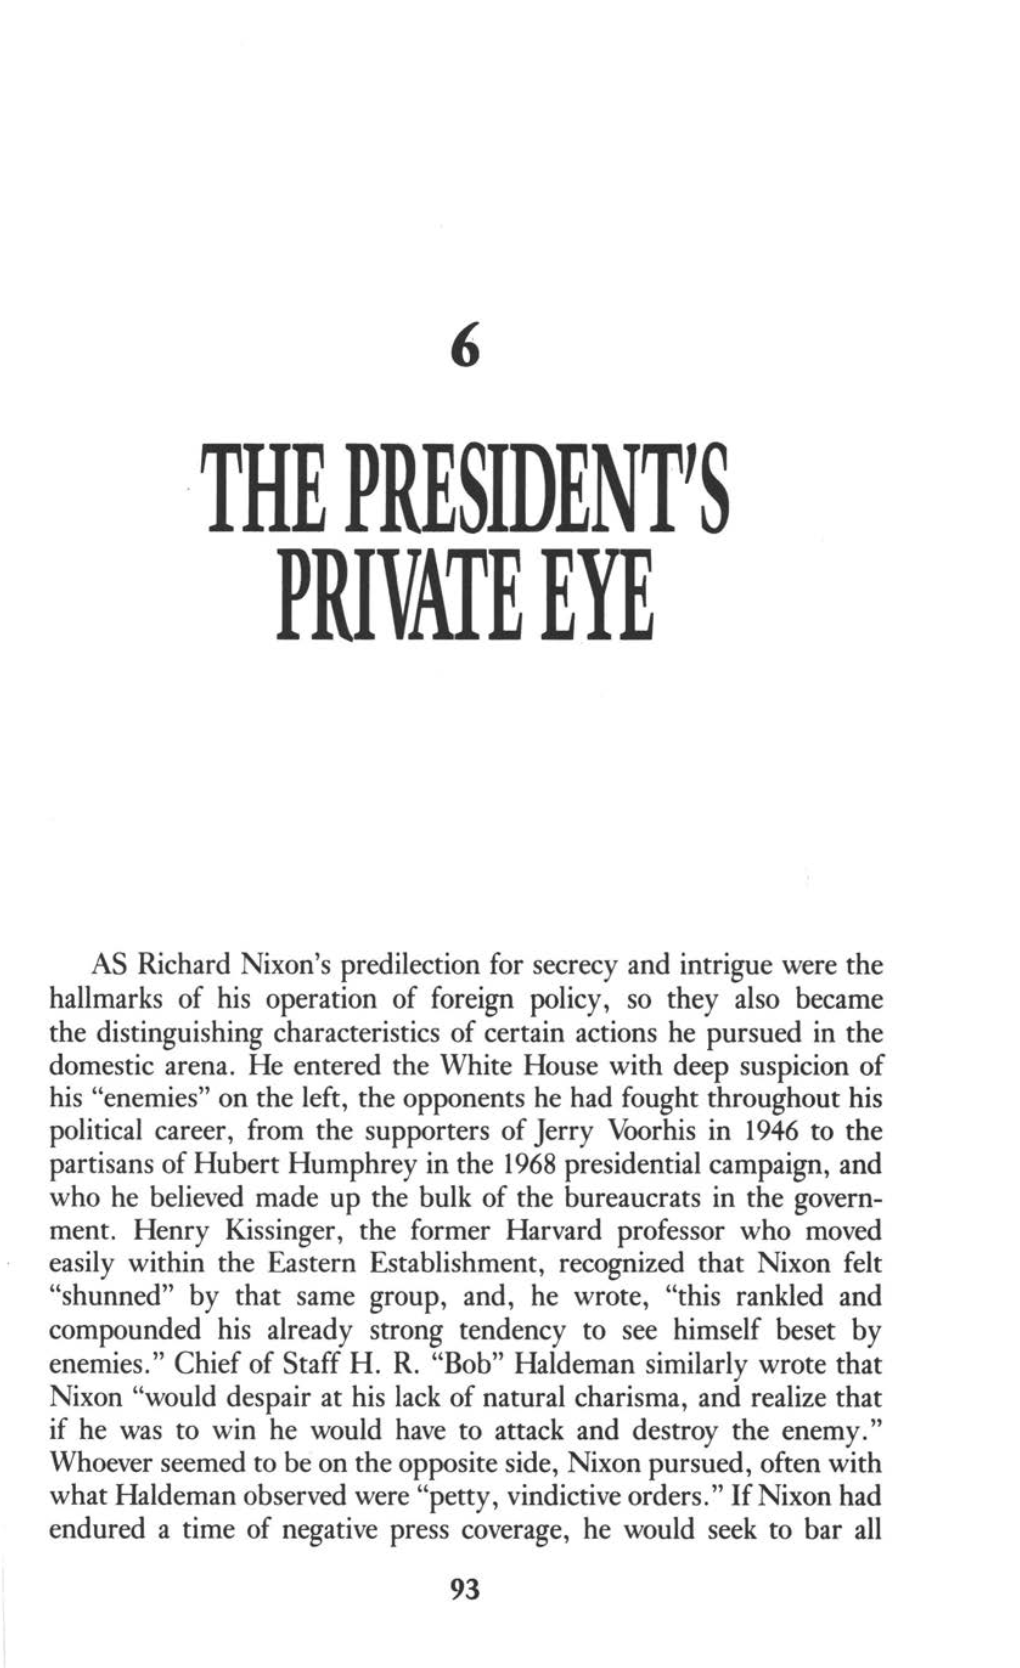 The President's Private Eye